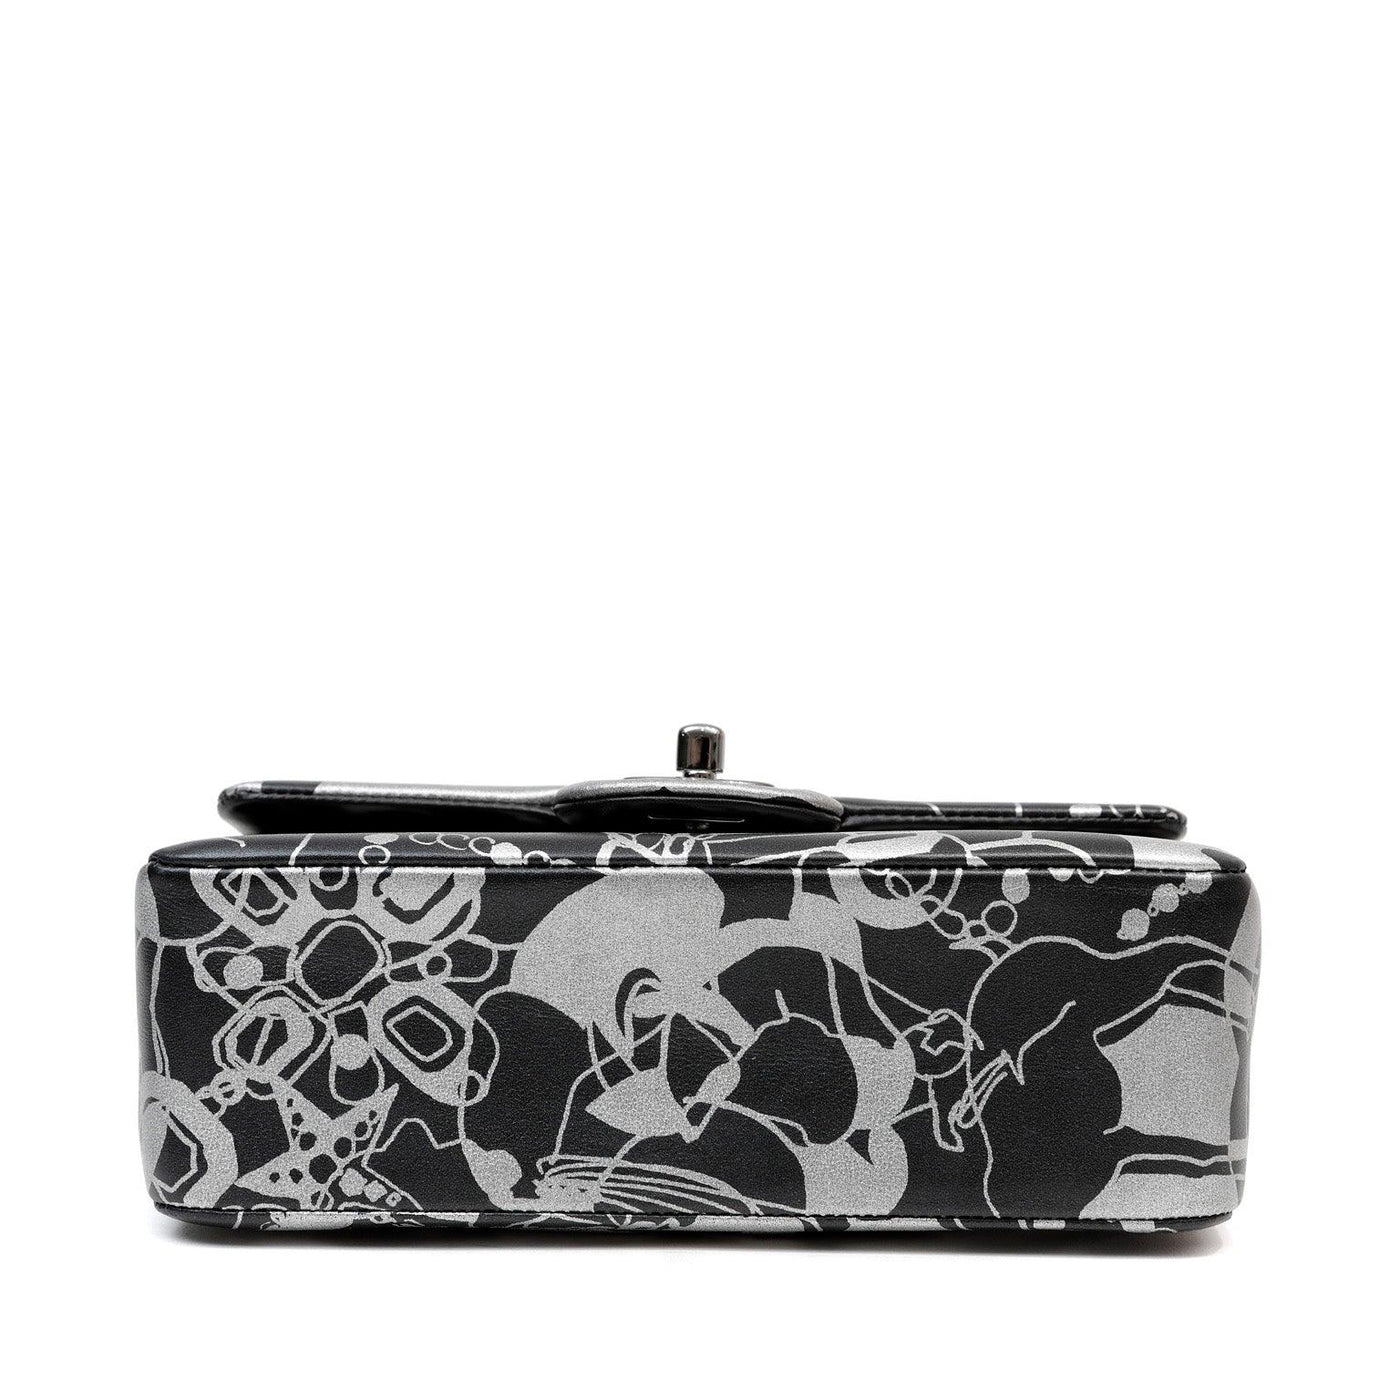 Chanel Black and Silver Lambskin Limited Edition Mini Classic - Only Authentics